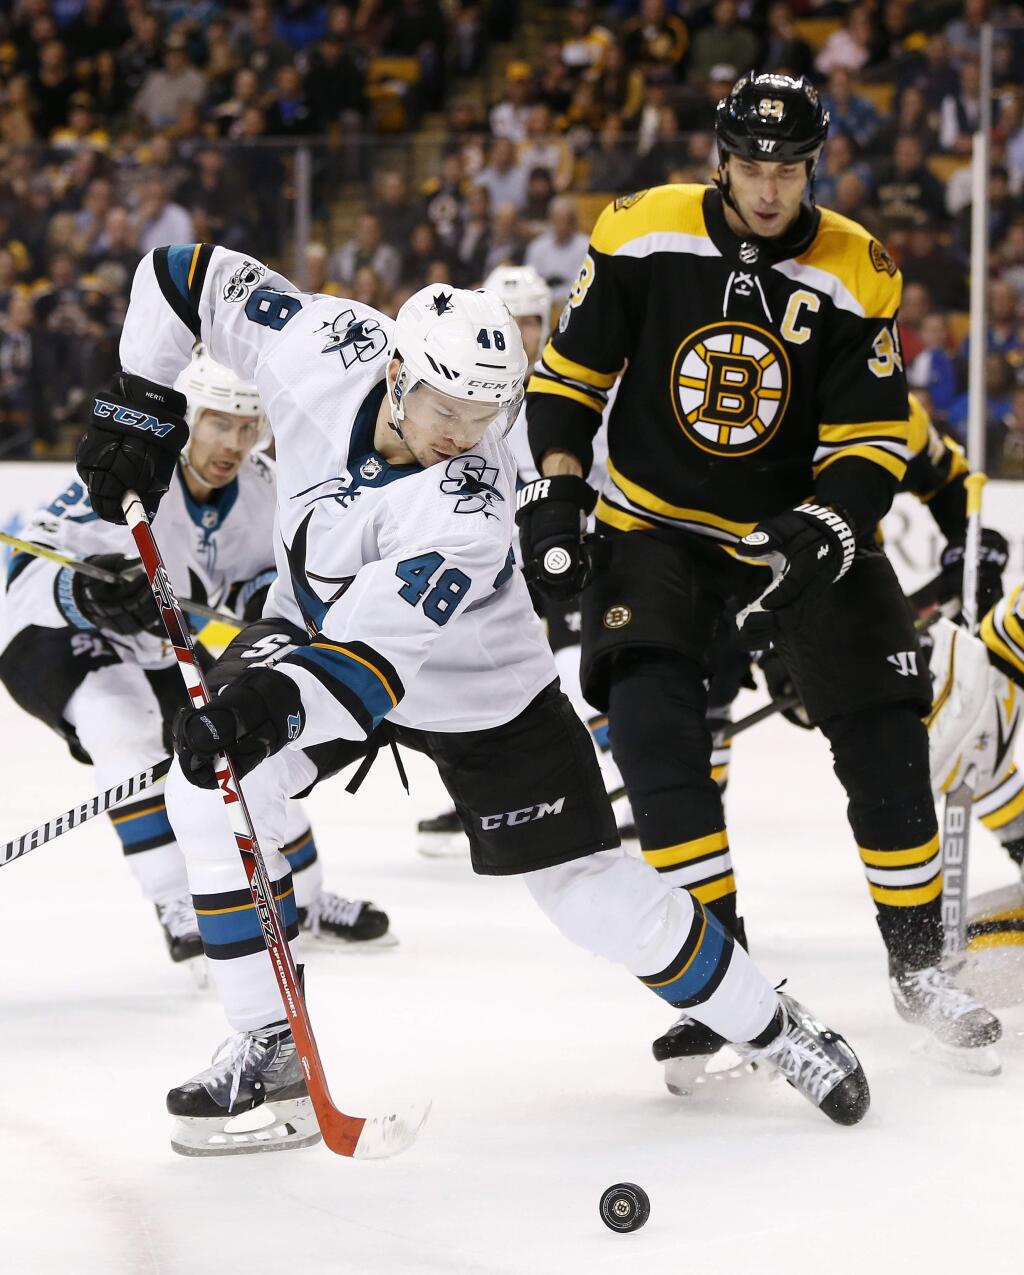 The San Jose Sharks' Tomas Hertl (48) tries to control the puck in front of Boston Bruins' Zdeno Chara (33) during the third period in Boston, Thursday, Oct. 26, 2017. The Bruins won 2-1. (AP Photo/Michael Dwyer)